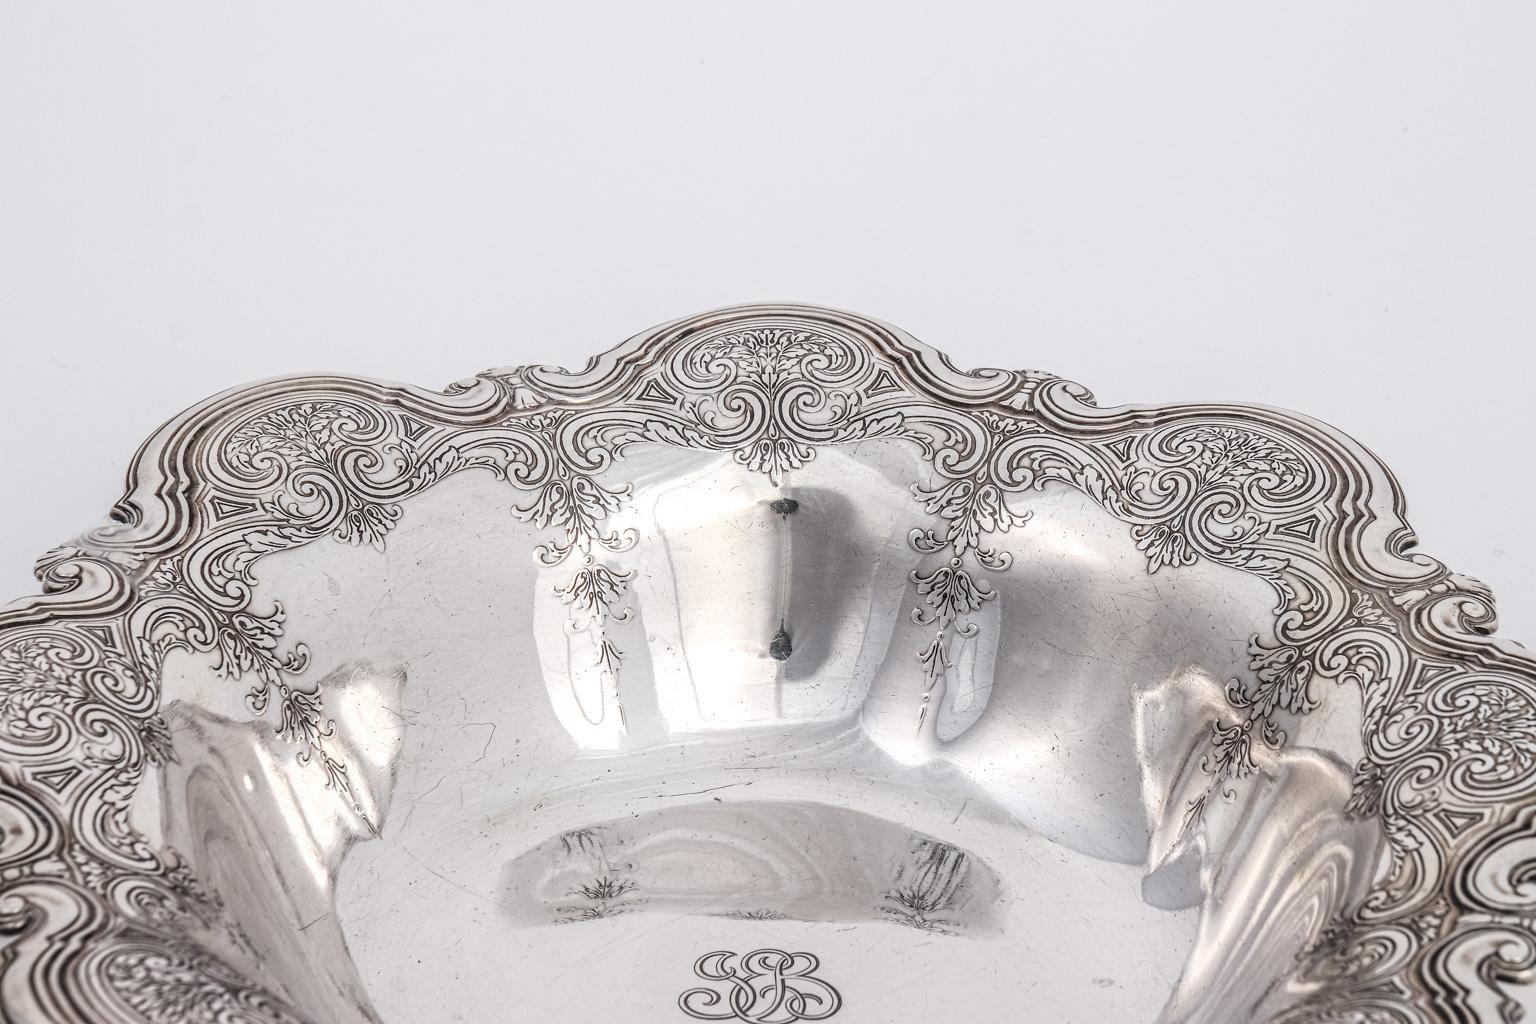 Tiffany and Co. makers bowl. Heavy 675 Grams. Deep engravings. Florals. Medallions, circa 1915.